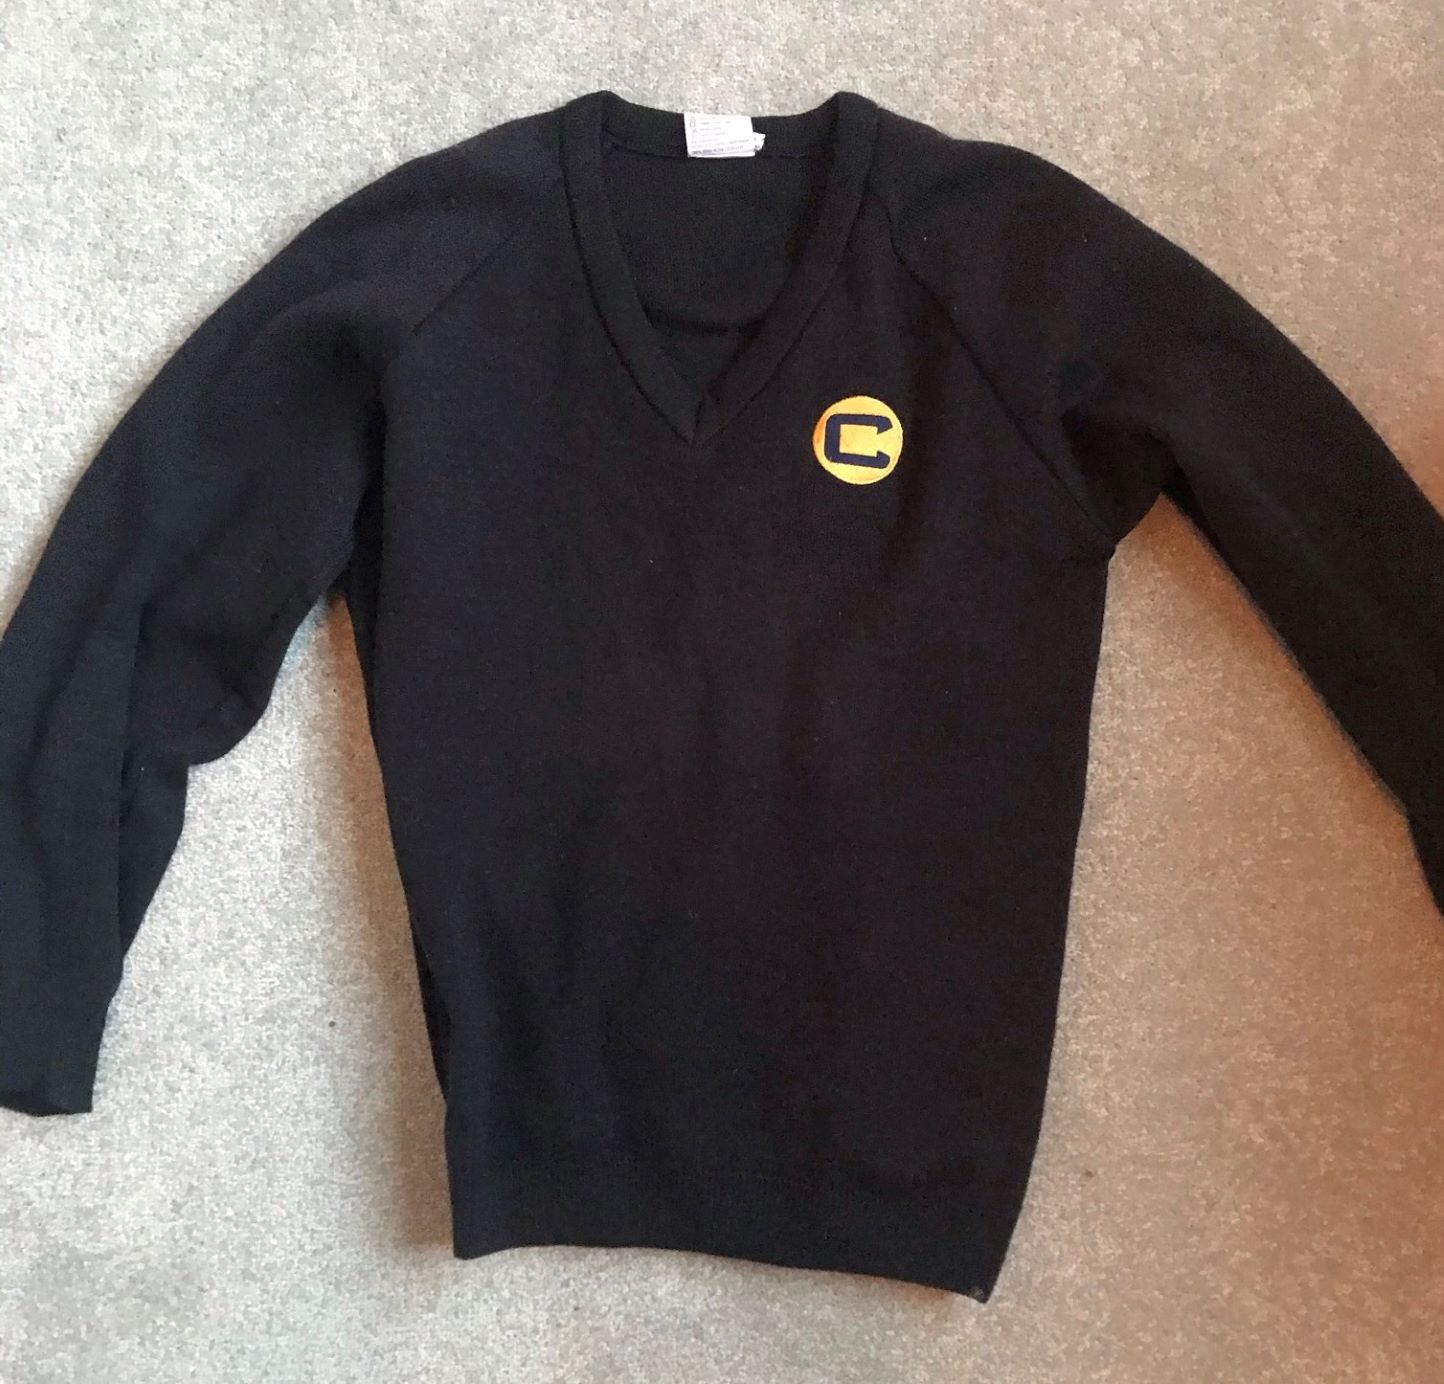 Charter North Jumper: Size 48 (Marked)